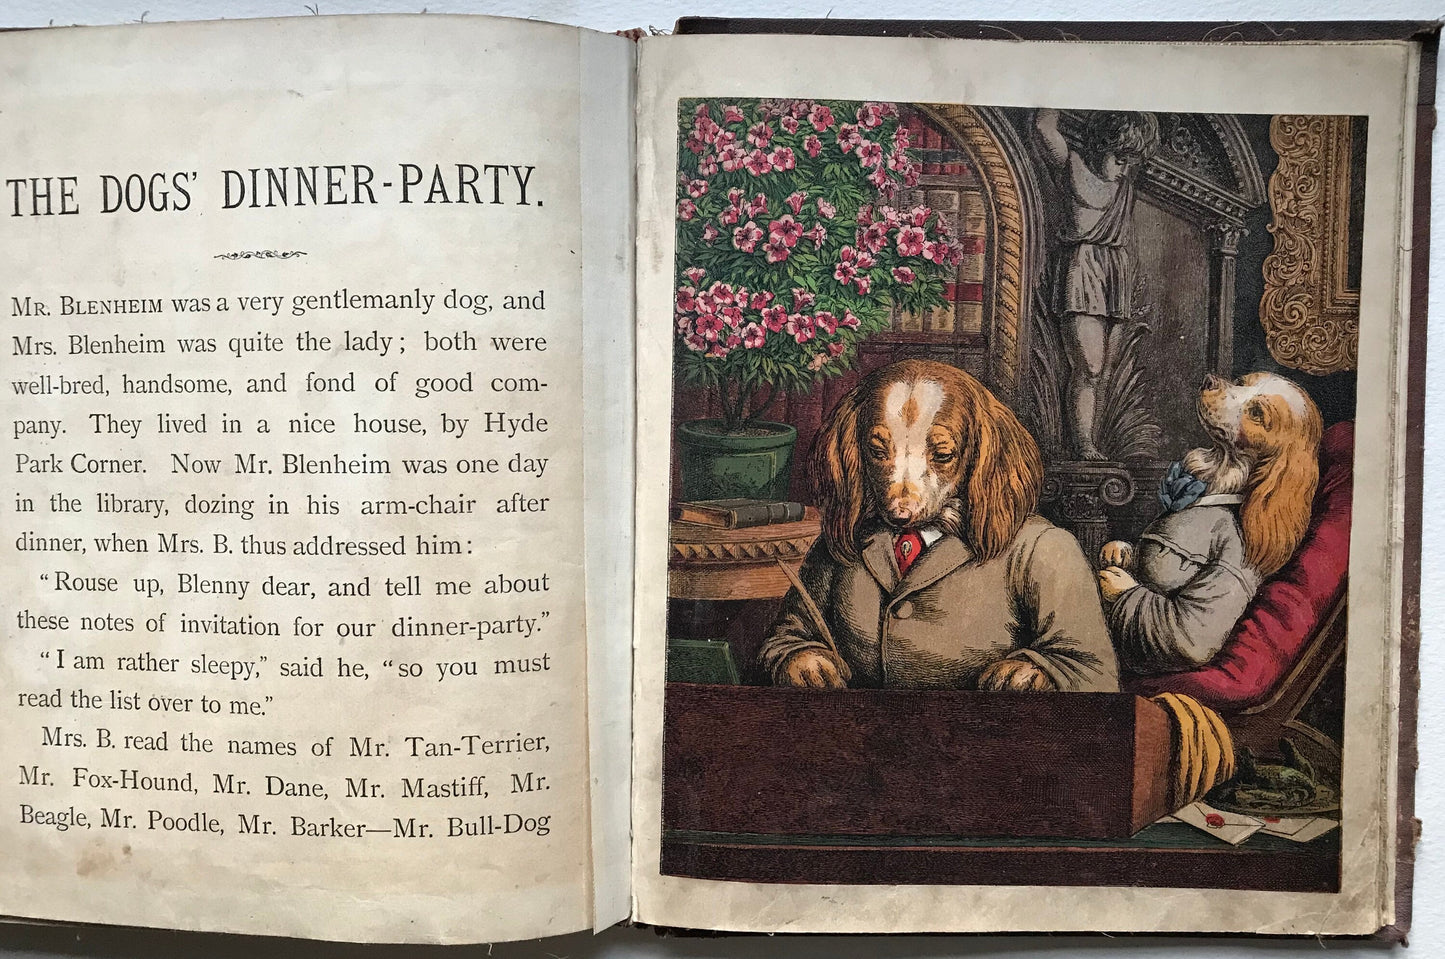 The Dogs’ Dinner Party, The White Cat, The Little Dog Trusty and My Mother. Published by George Routledge in 1870. 27 x 23 cms.